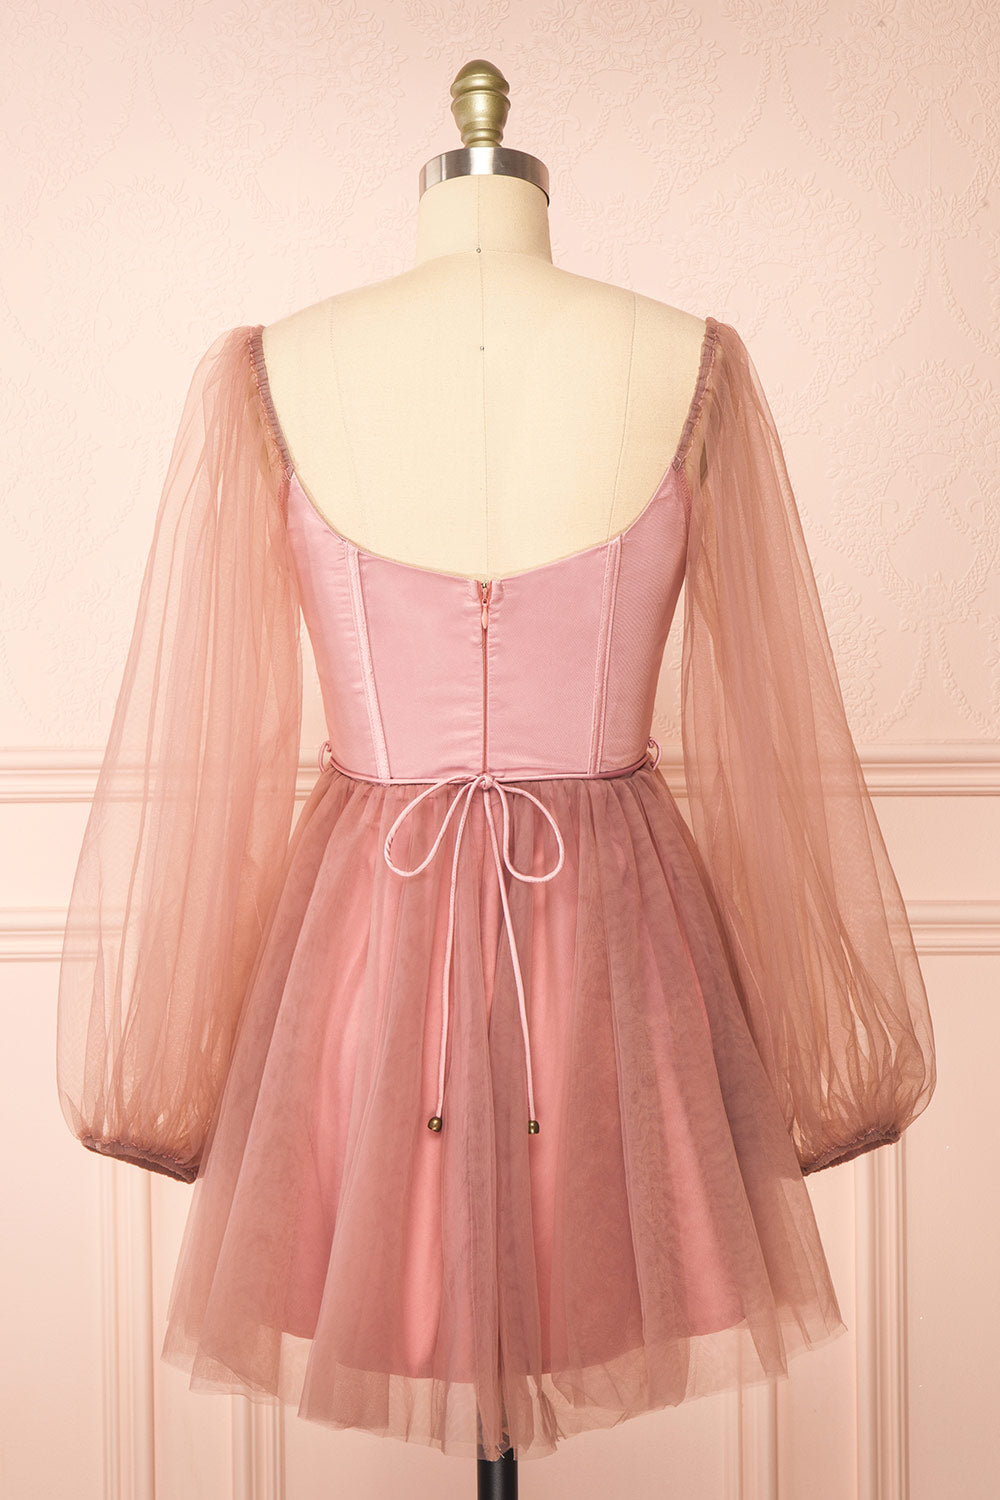 dressimeSweetheart Homecoming Dresses A Line Tulle With Long Sleeves 